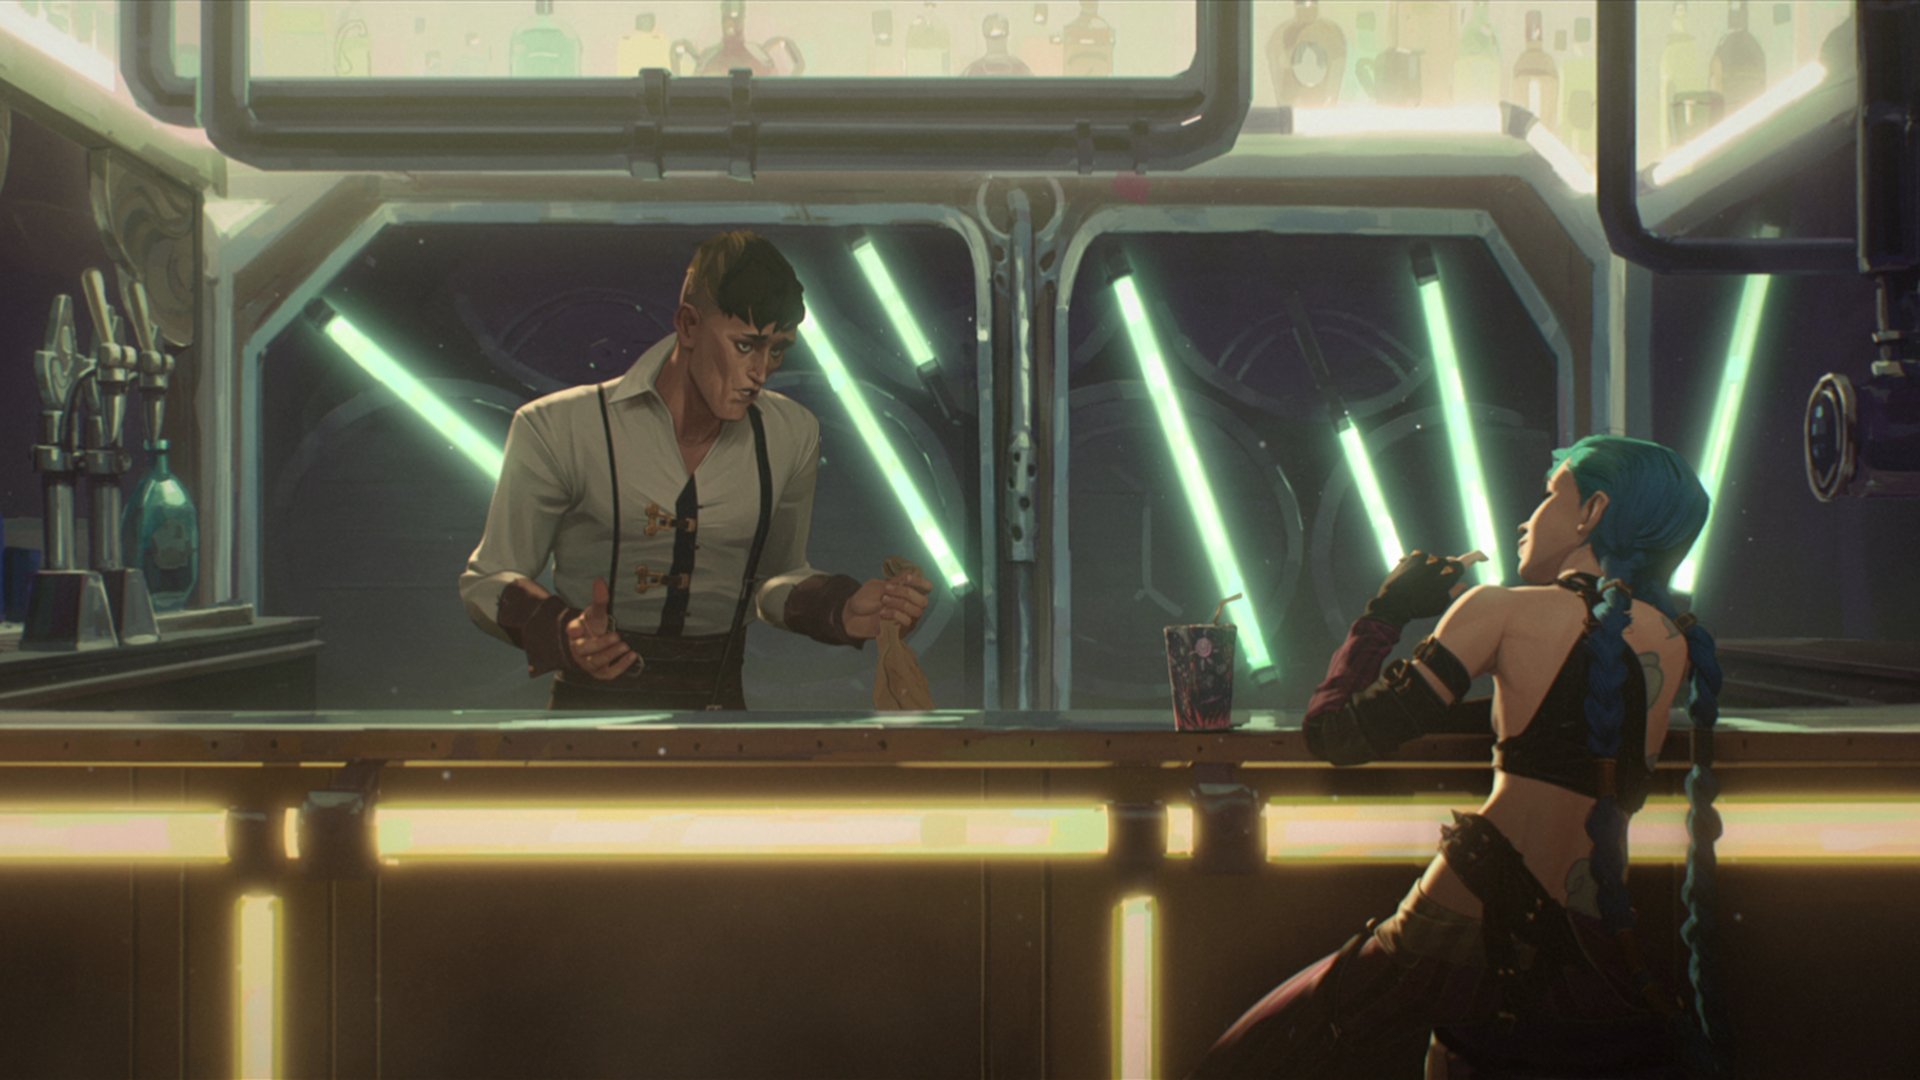 An animated scene showing a bartender in a futuristic, dilapidated bar, serving the character Jinx.